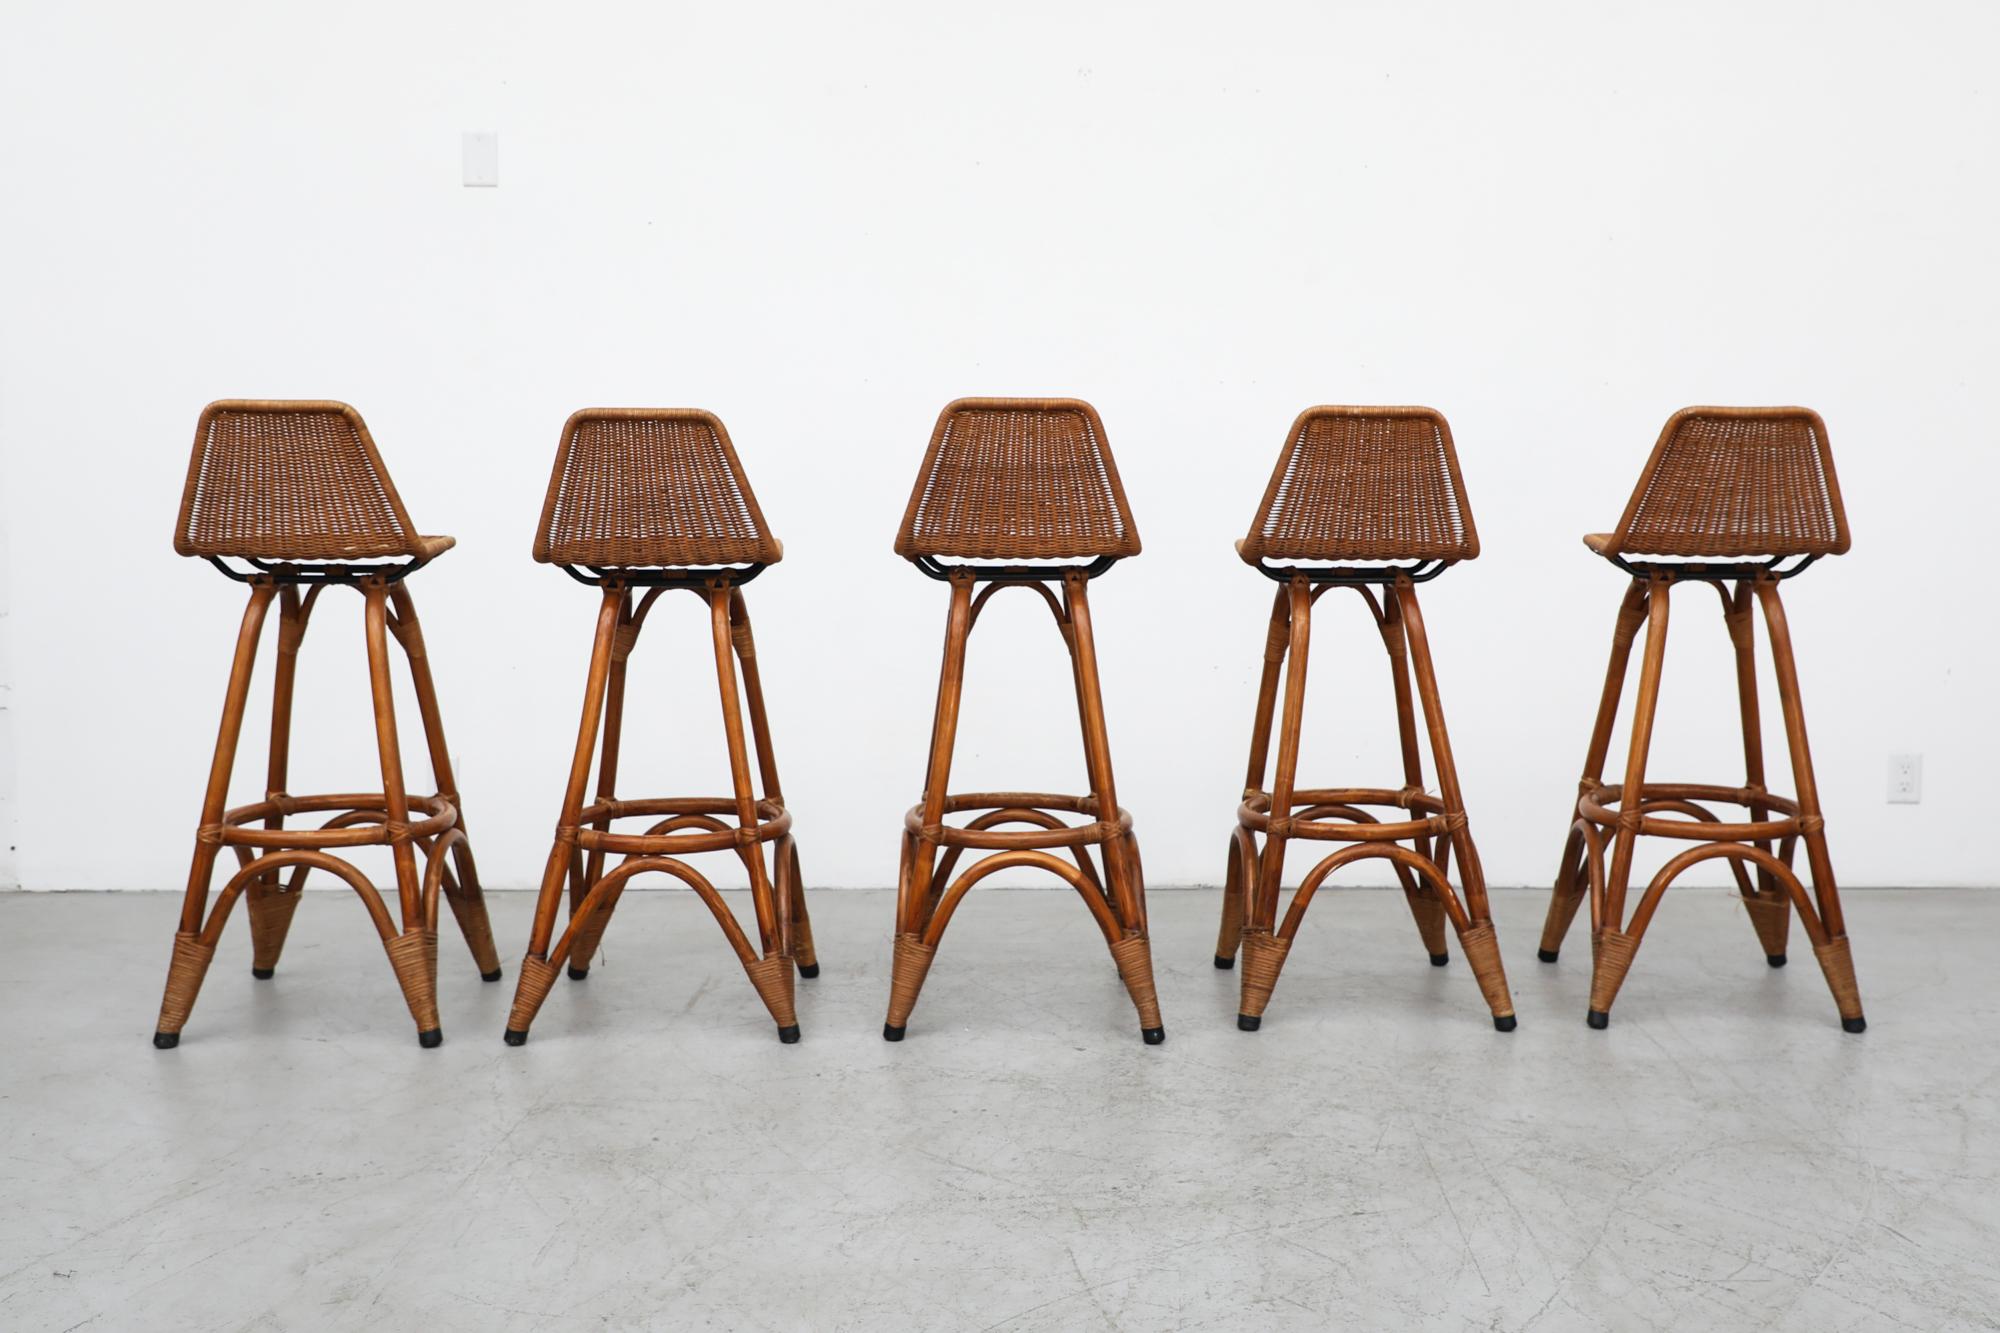 Mid-20th Century Set of 5 Rohe Noordwolde Rattan and Bamboo Bar Stools